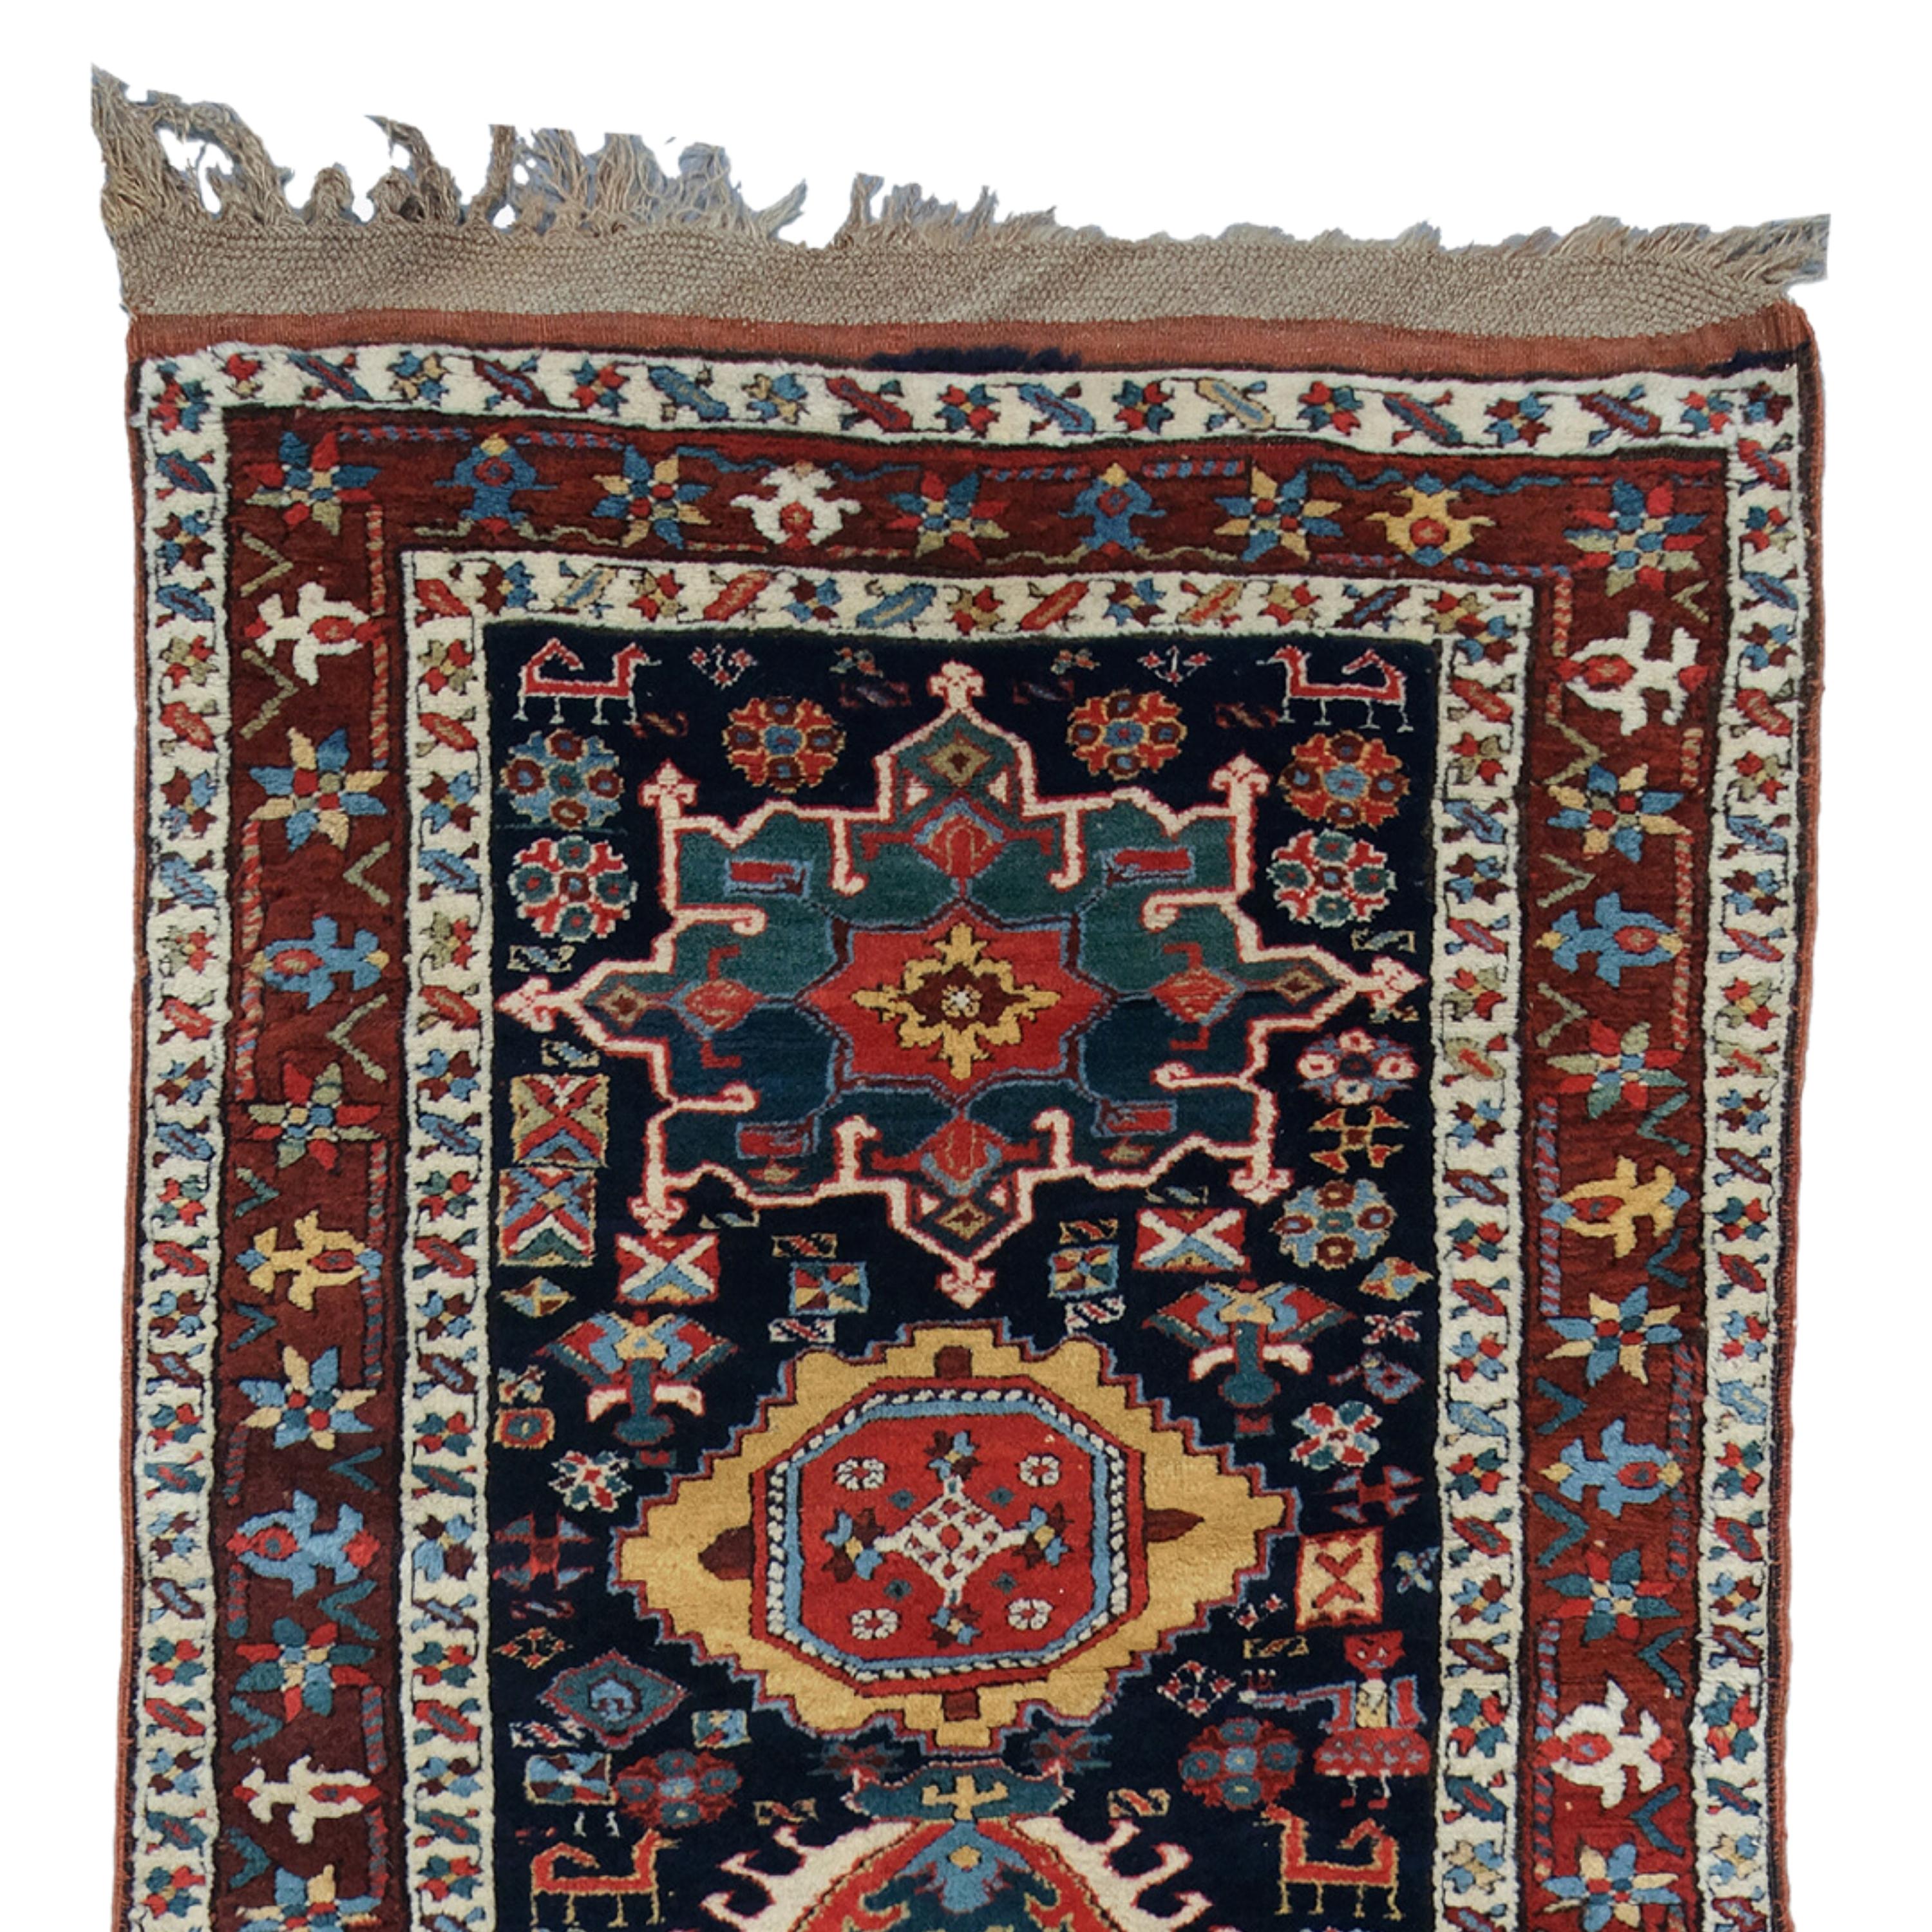 A Historical Artifact: 19th Century Caucasian Karabakh Road

If you want to add a historical and cultural artifact to your home, this antique runner is for you. This runner is a Caucasian-Karabakh runner from the 19th century. Karabakh is one of the